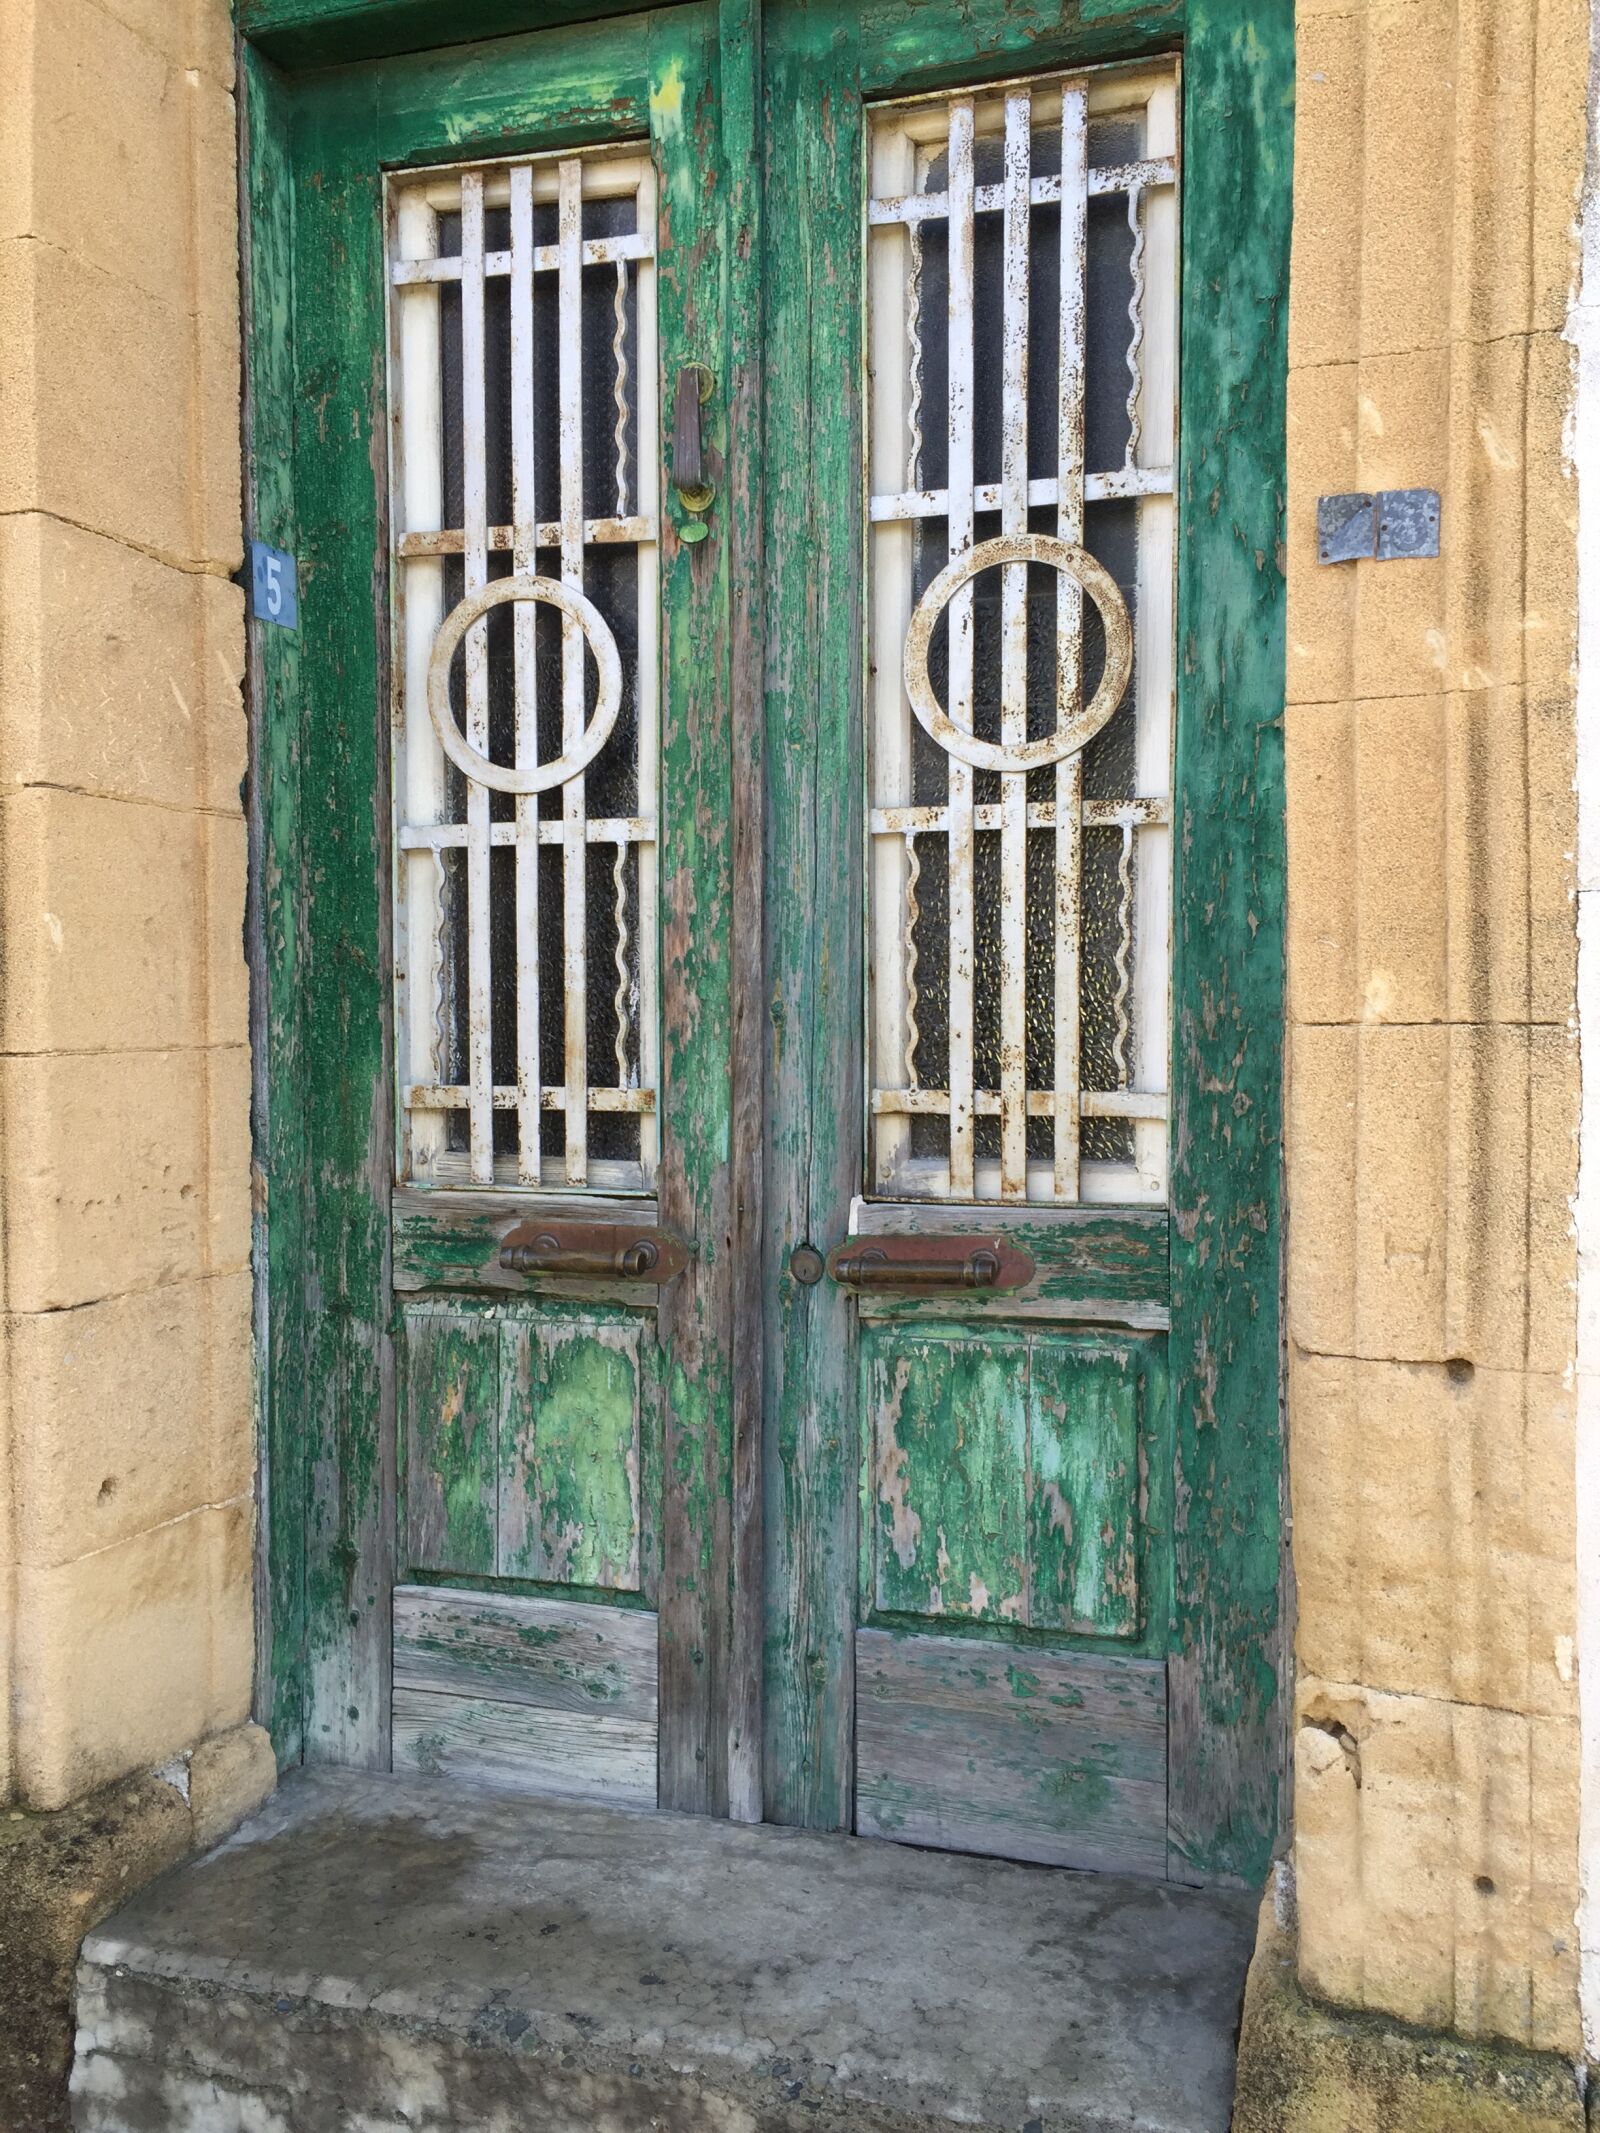 Apple iPhone 6 + iPhone 6 back camera 4.15mm f/2.2 sample photo. Old, door, architecture photography